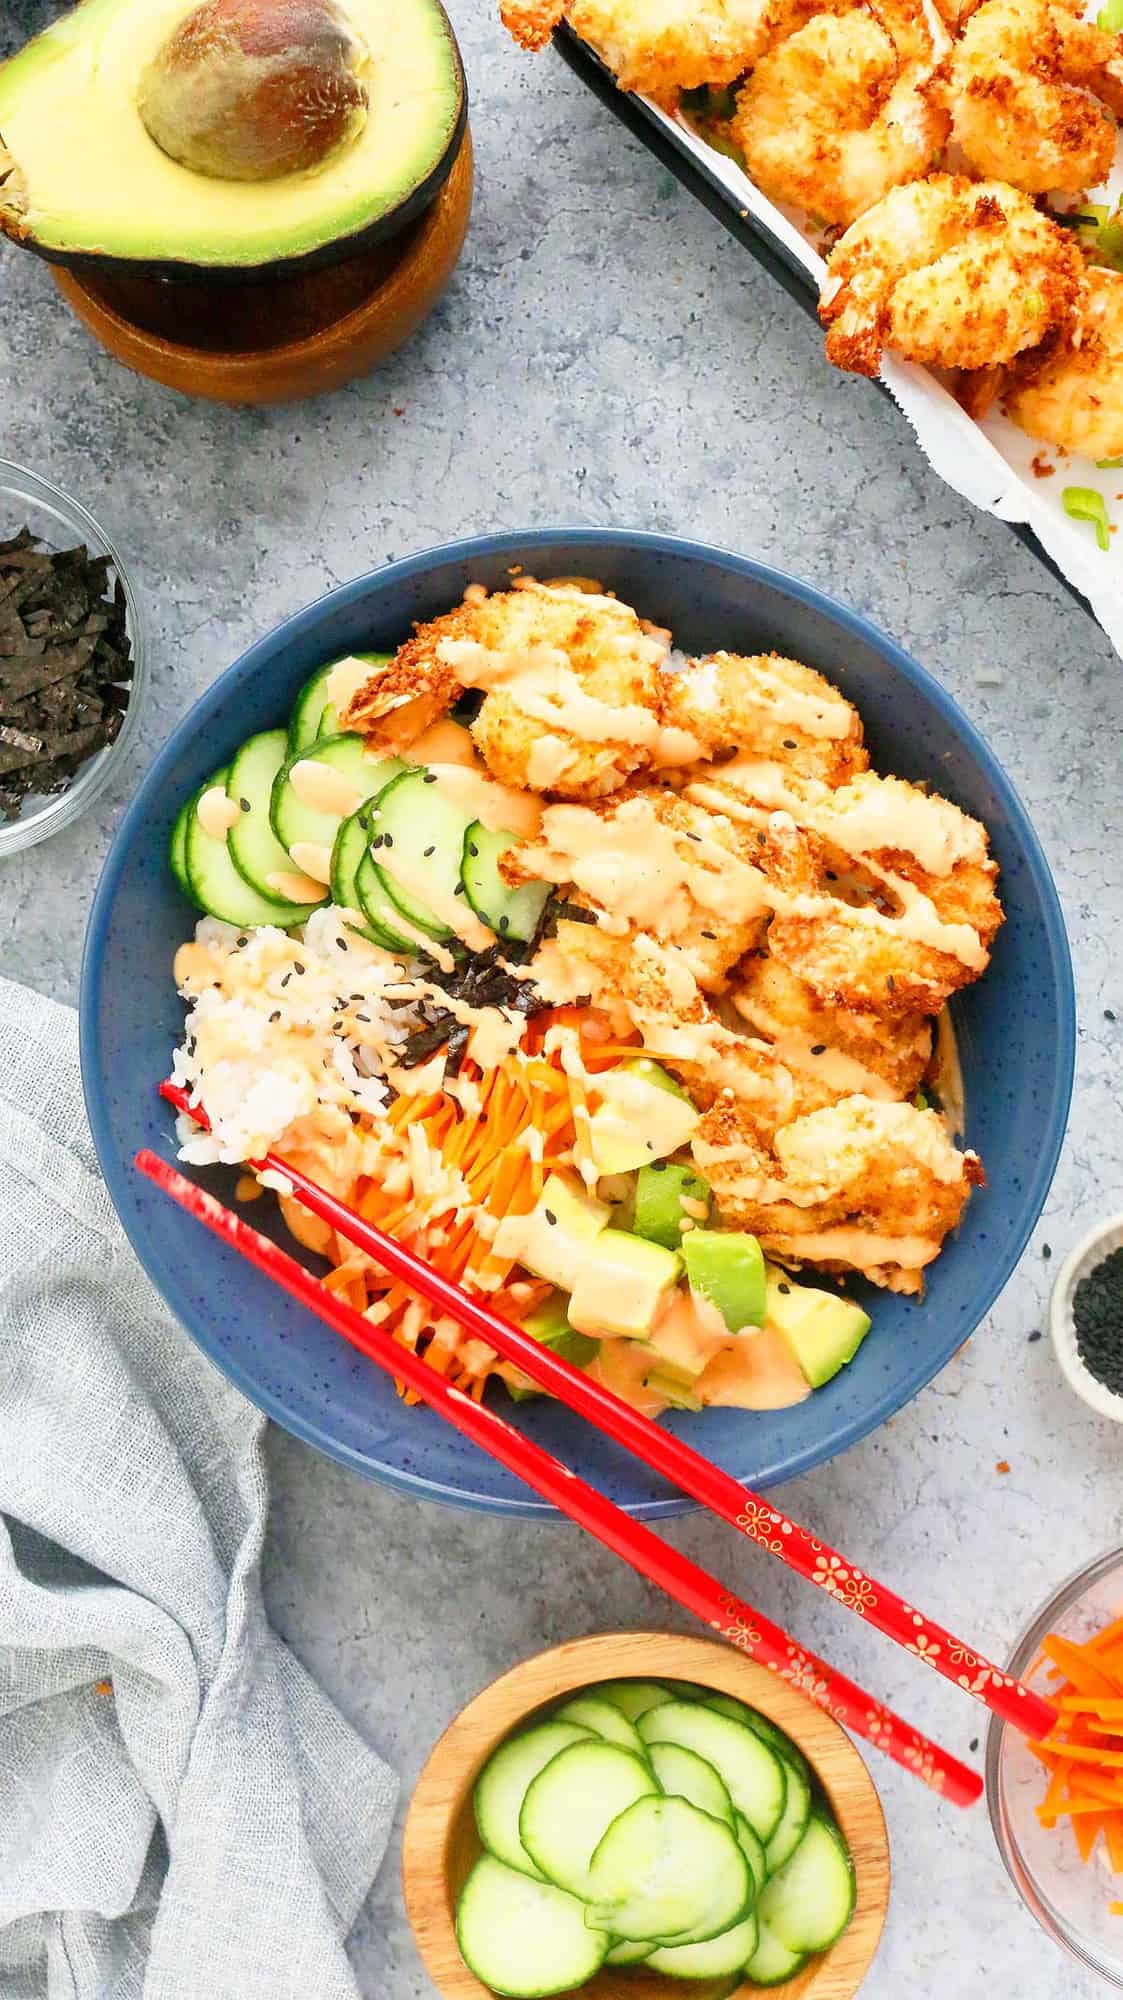 sushi sushi bowl drizzled with spicy sriracha mayo along with red chopsticks